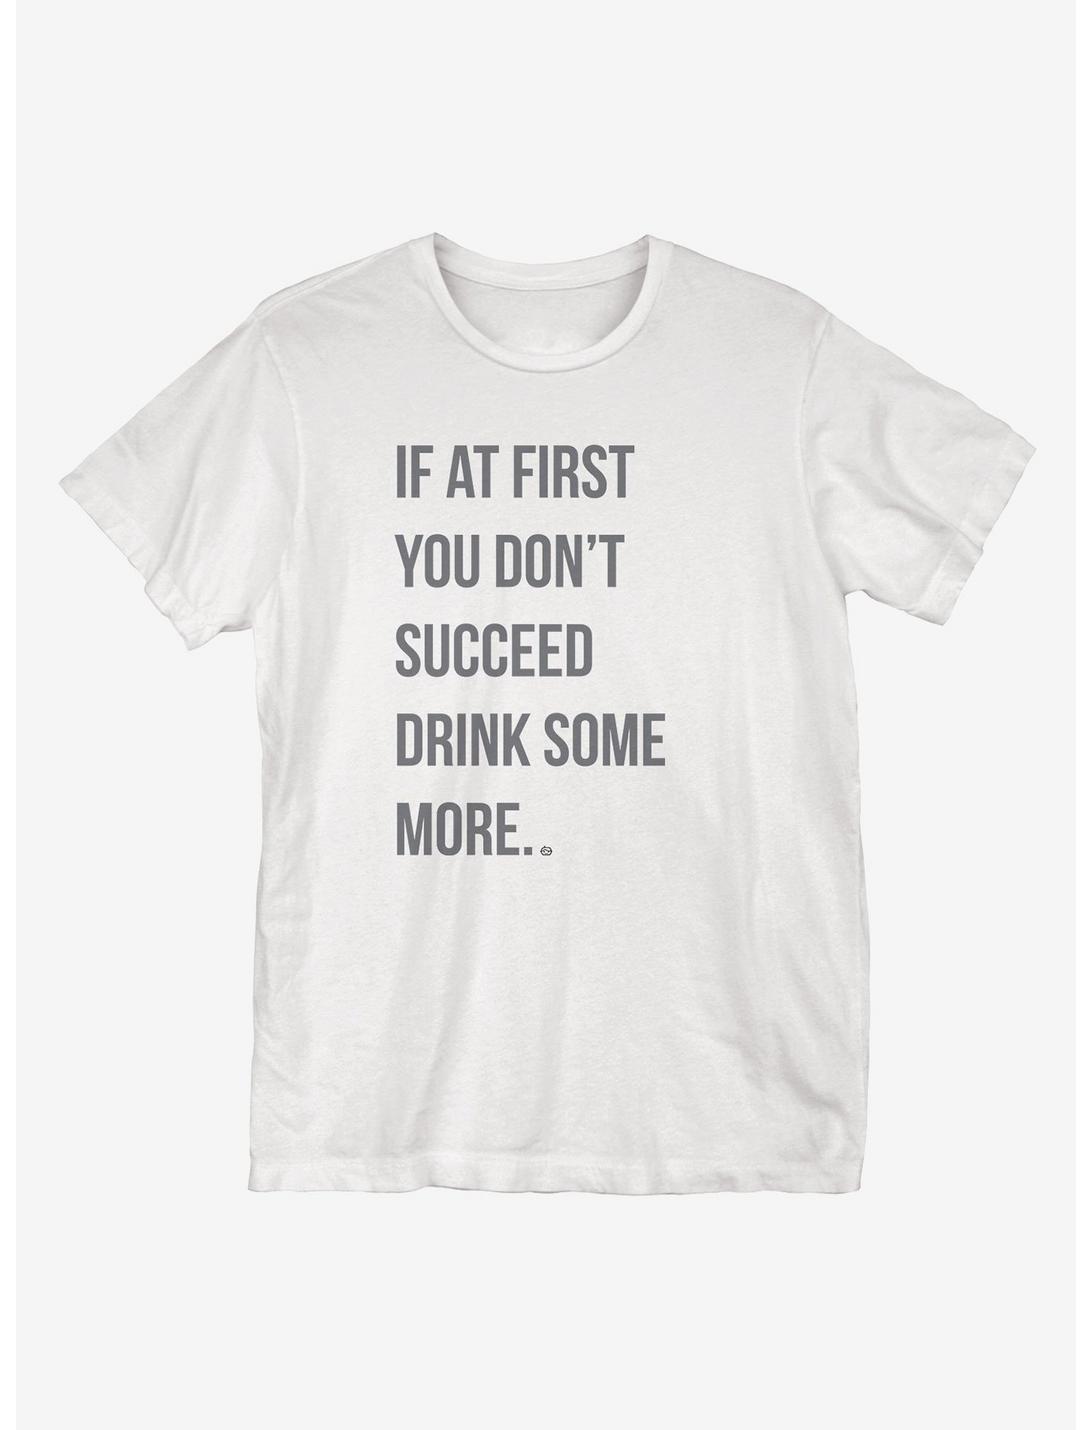 Drink Some More T-Shirt, WHITE, hi-res